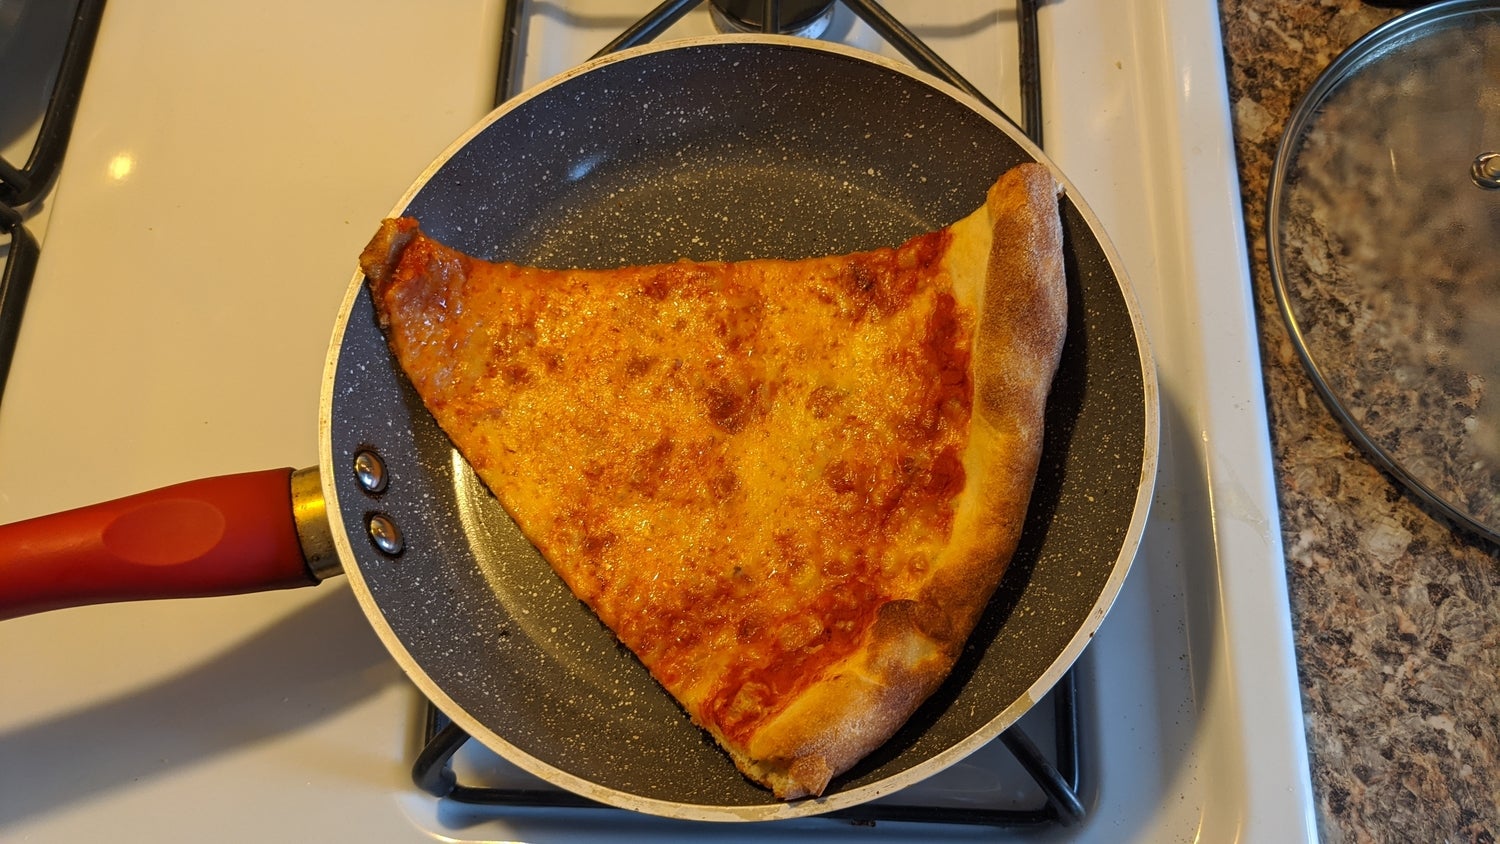 A slice of cheese pizza in a frying pan as part of an experiment to find the best way to reheat pizza.